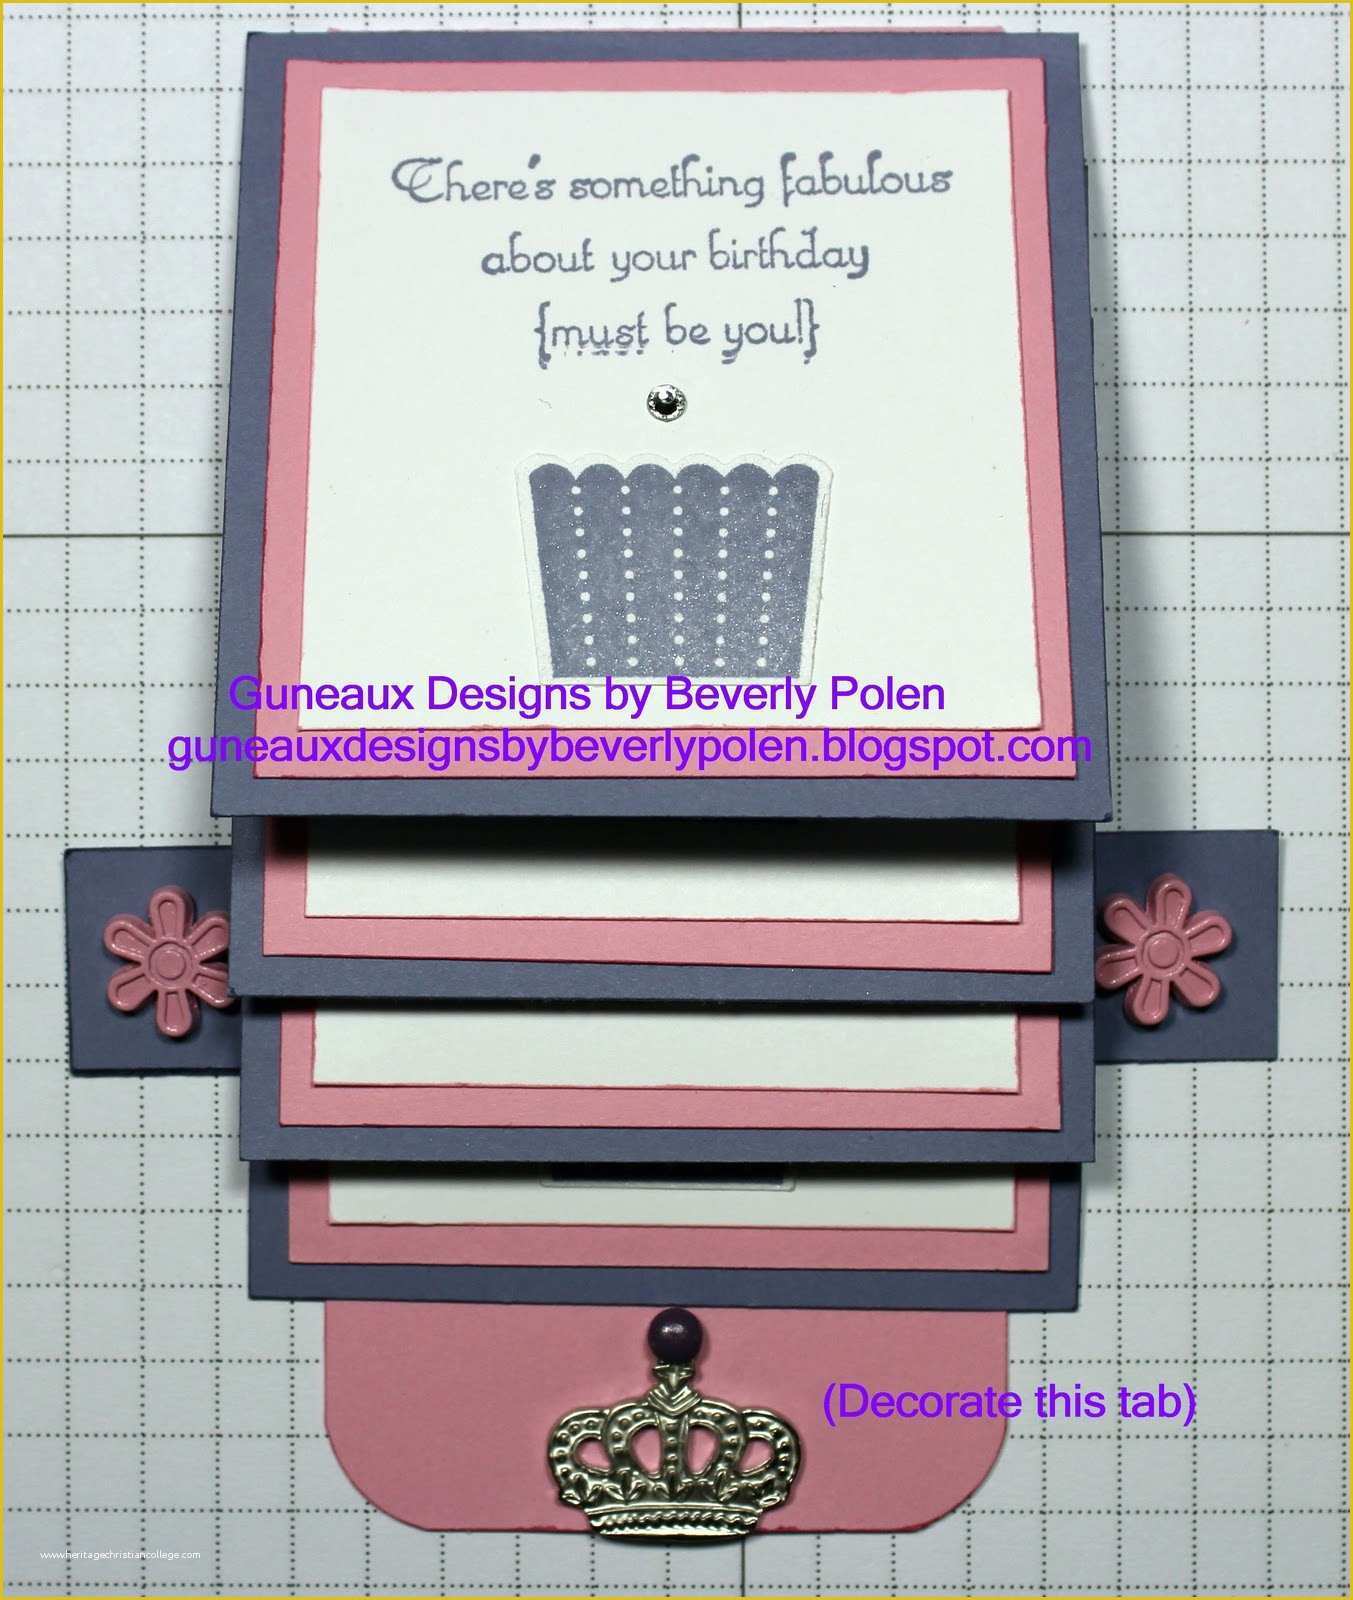 Waterfall Card Template Free Of Guneaux Designs by Beverly Polen How to Make A Waterfall